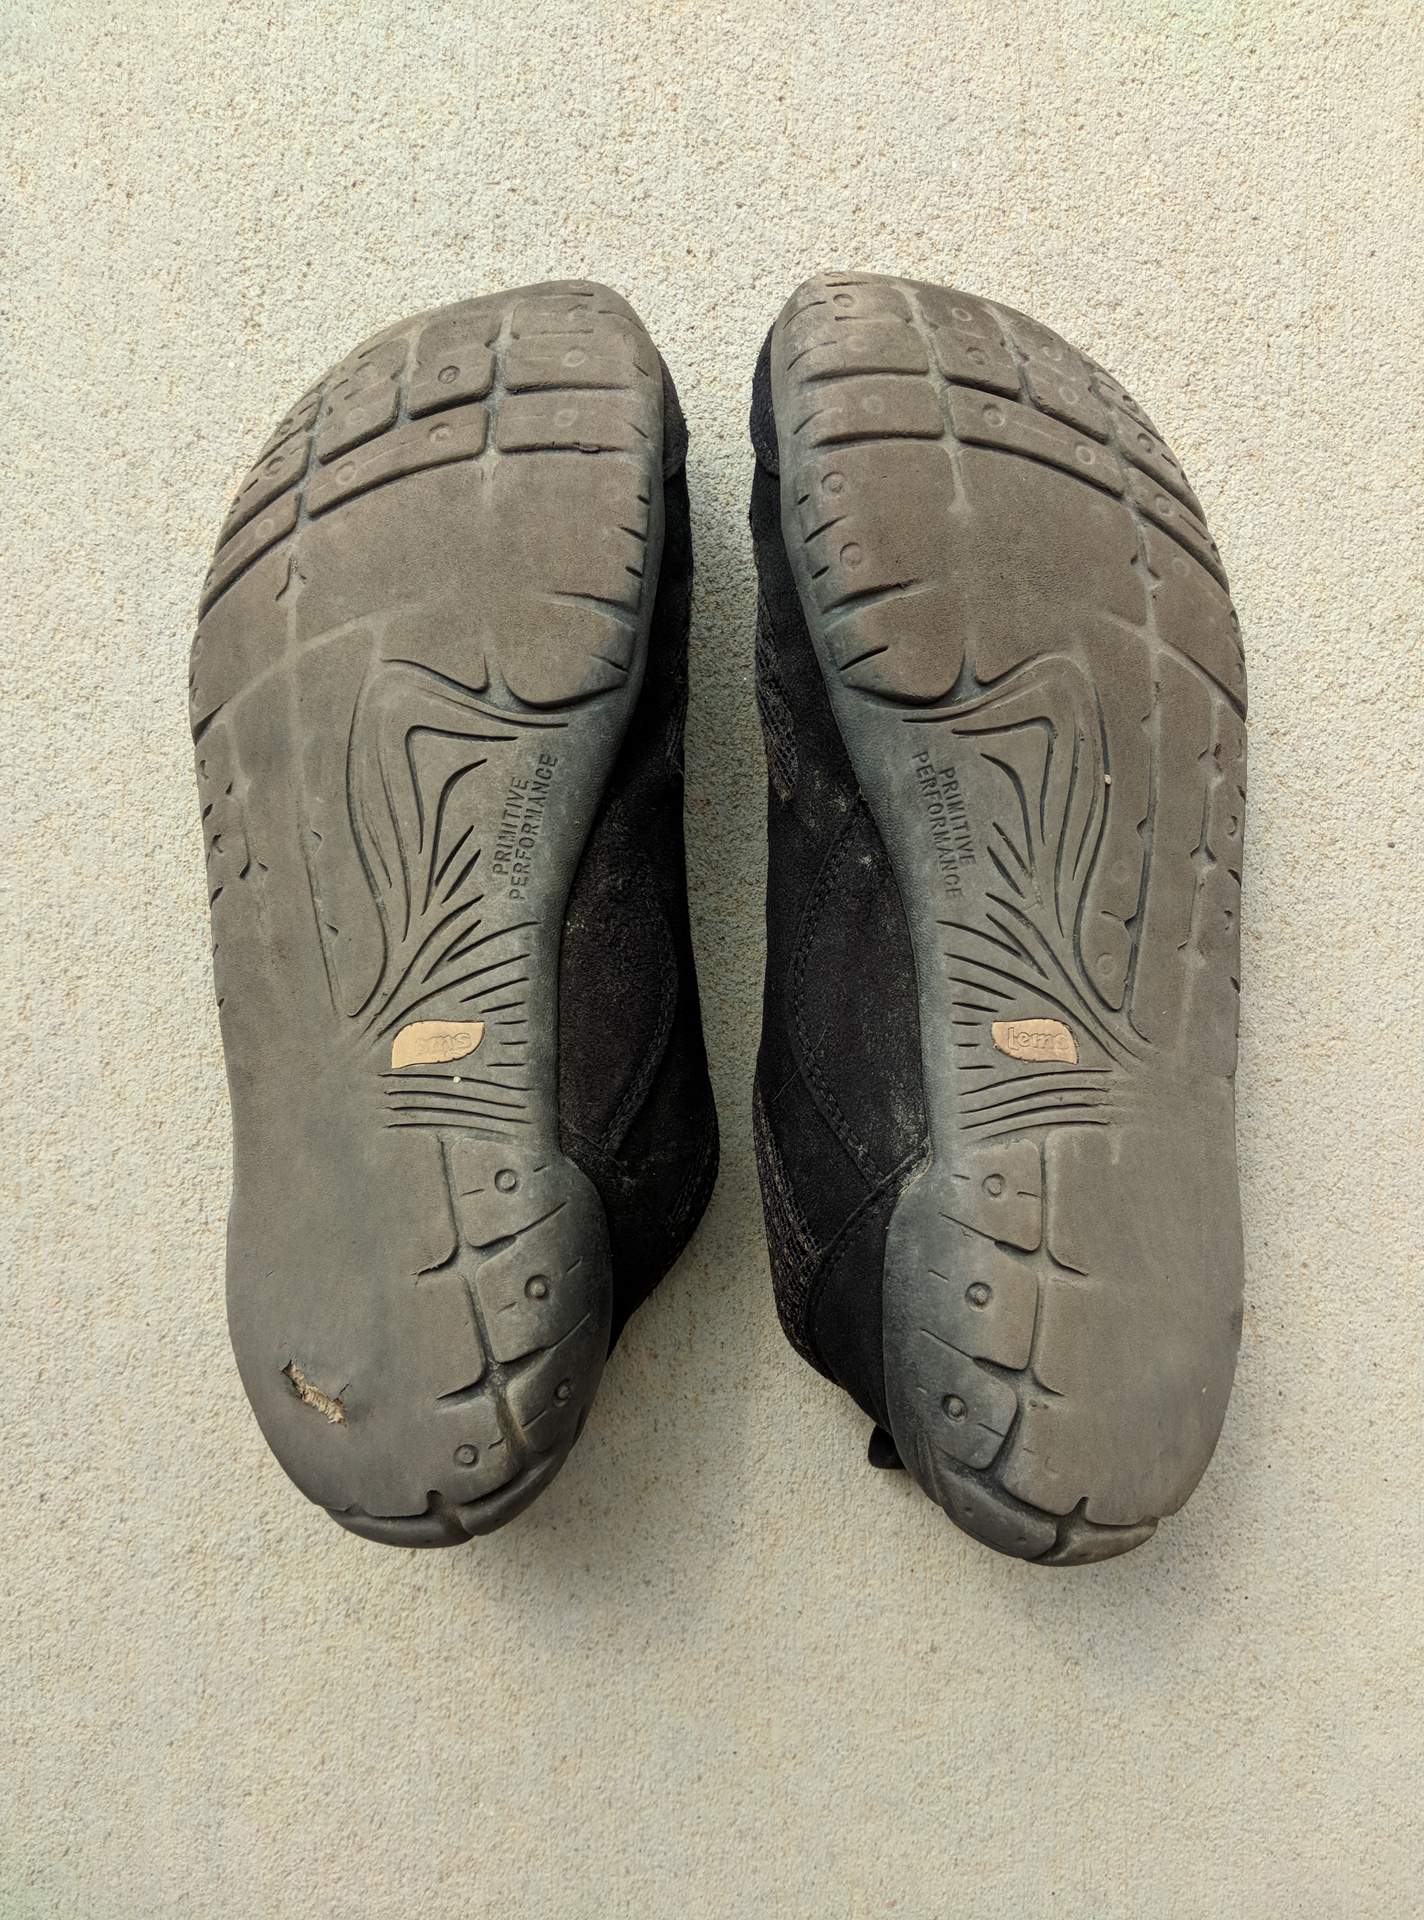 Lems Primal 2 Shoes: How Long Do They Last?